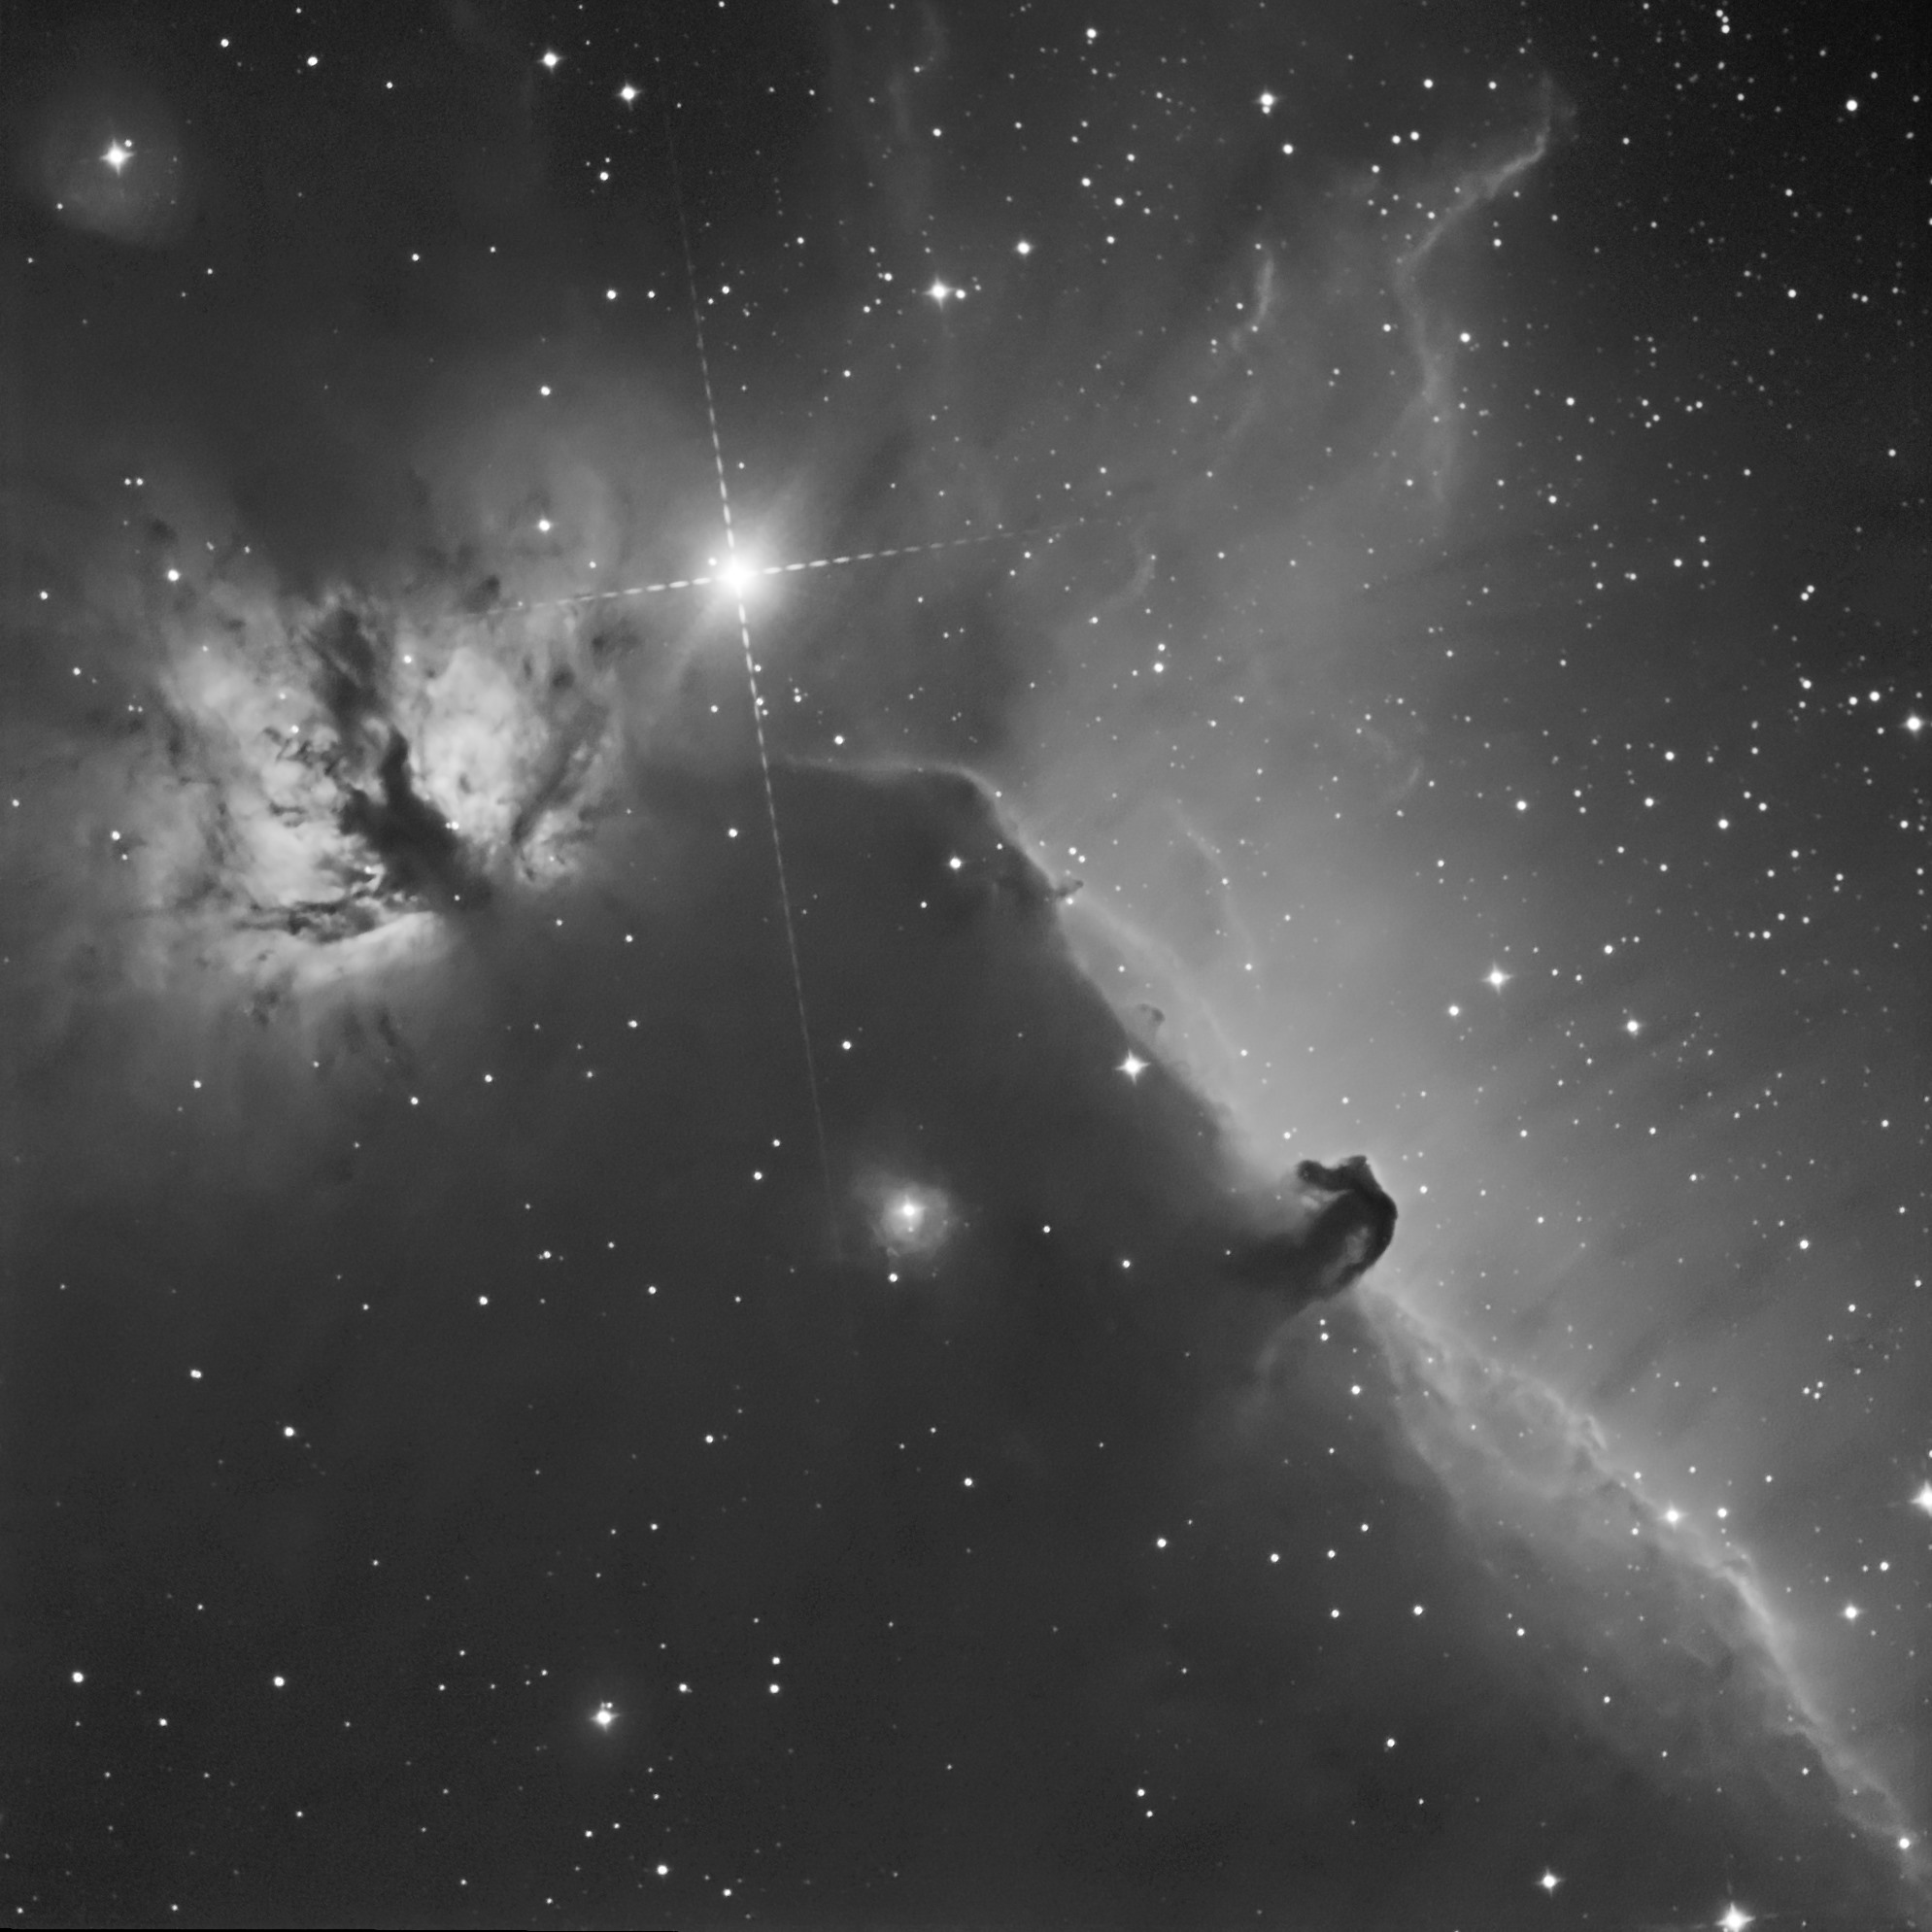 Horsehead and Flame in Hydrogen Alpha